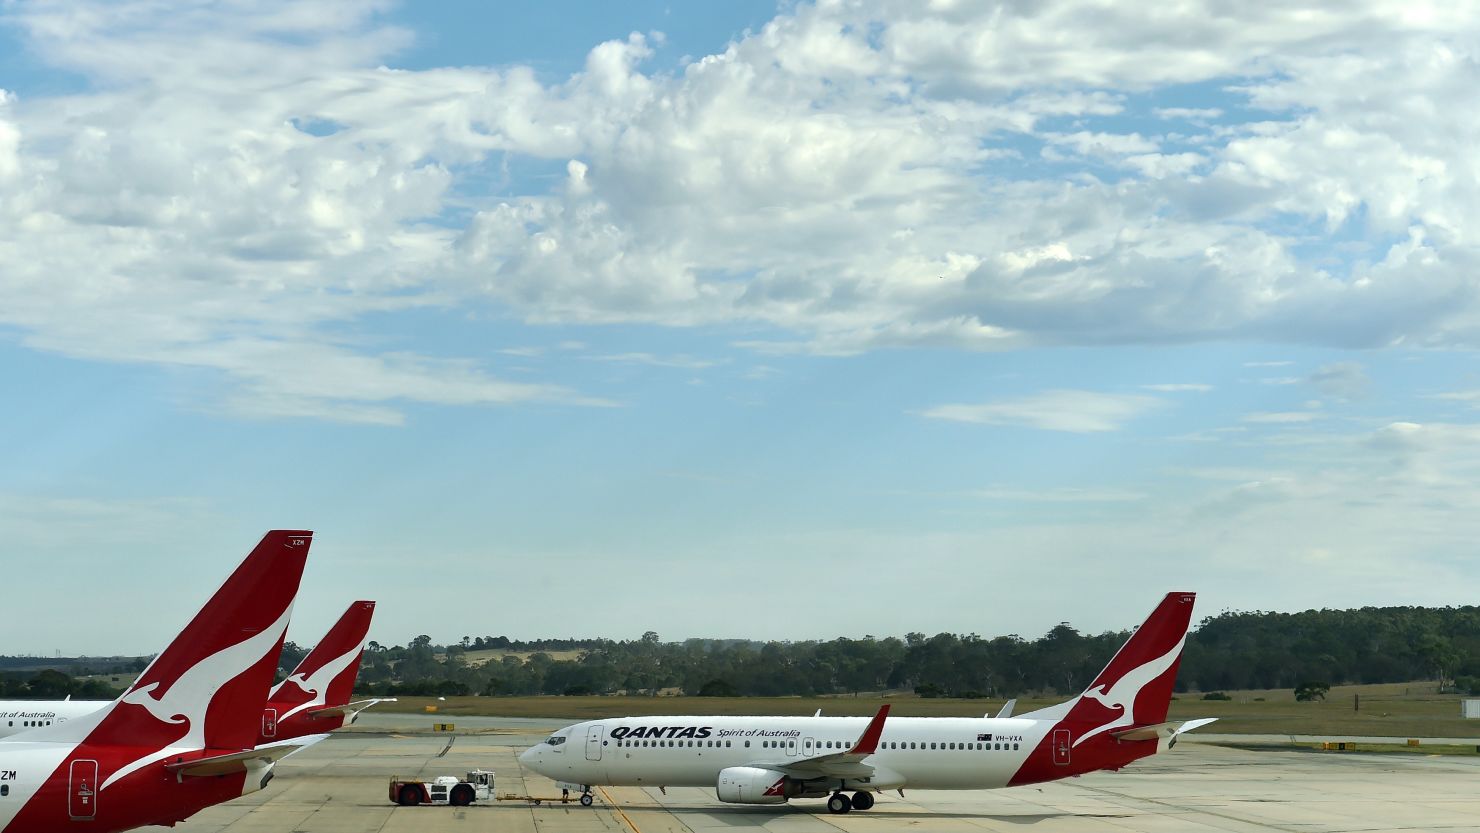 A Qantas plane leaves a departure gate at Melbourne Airport, in 2015.